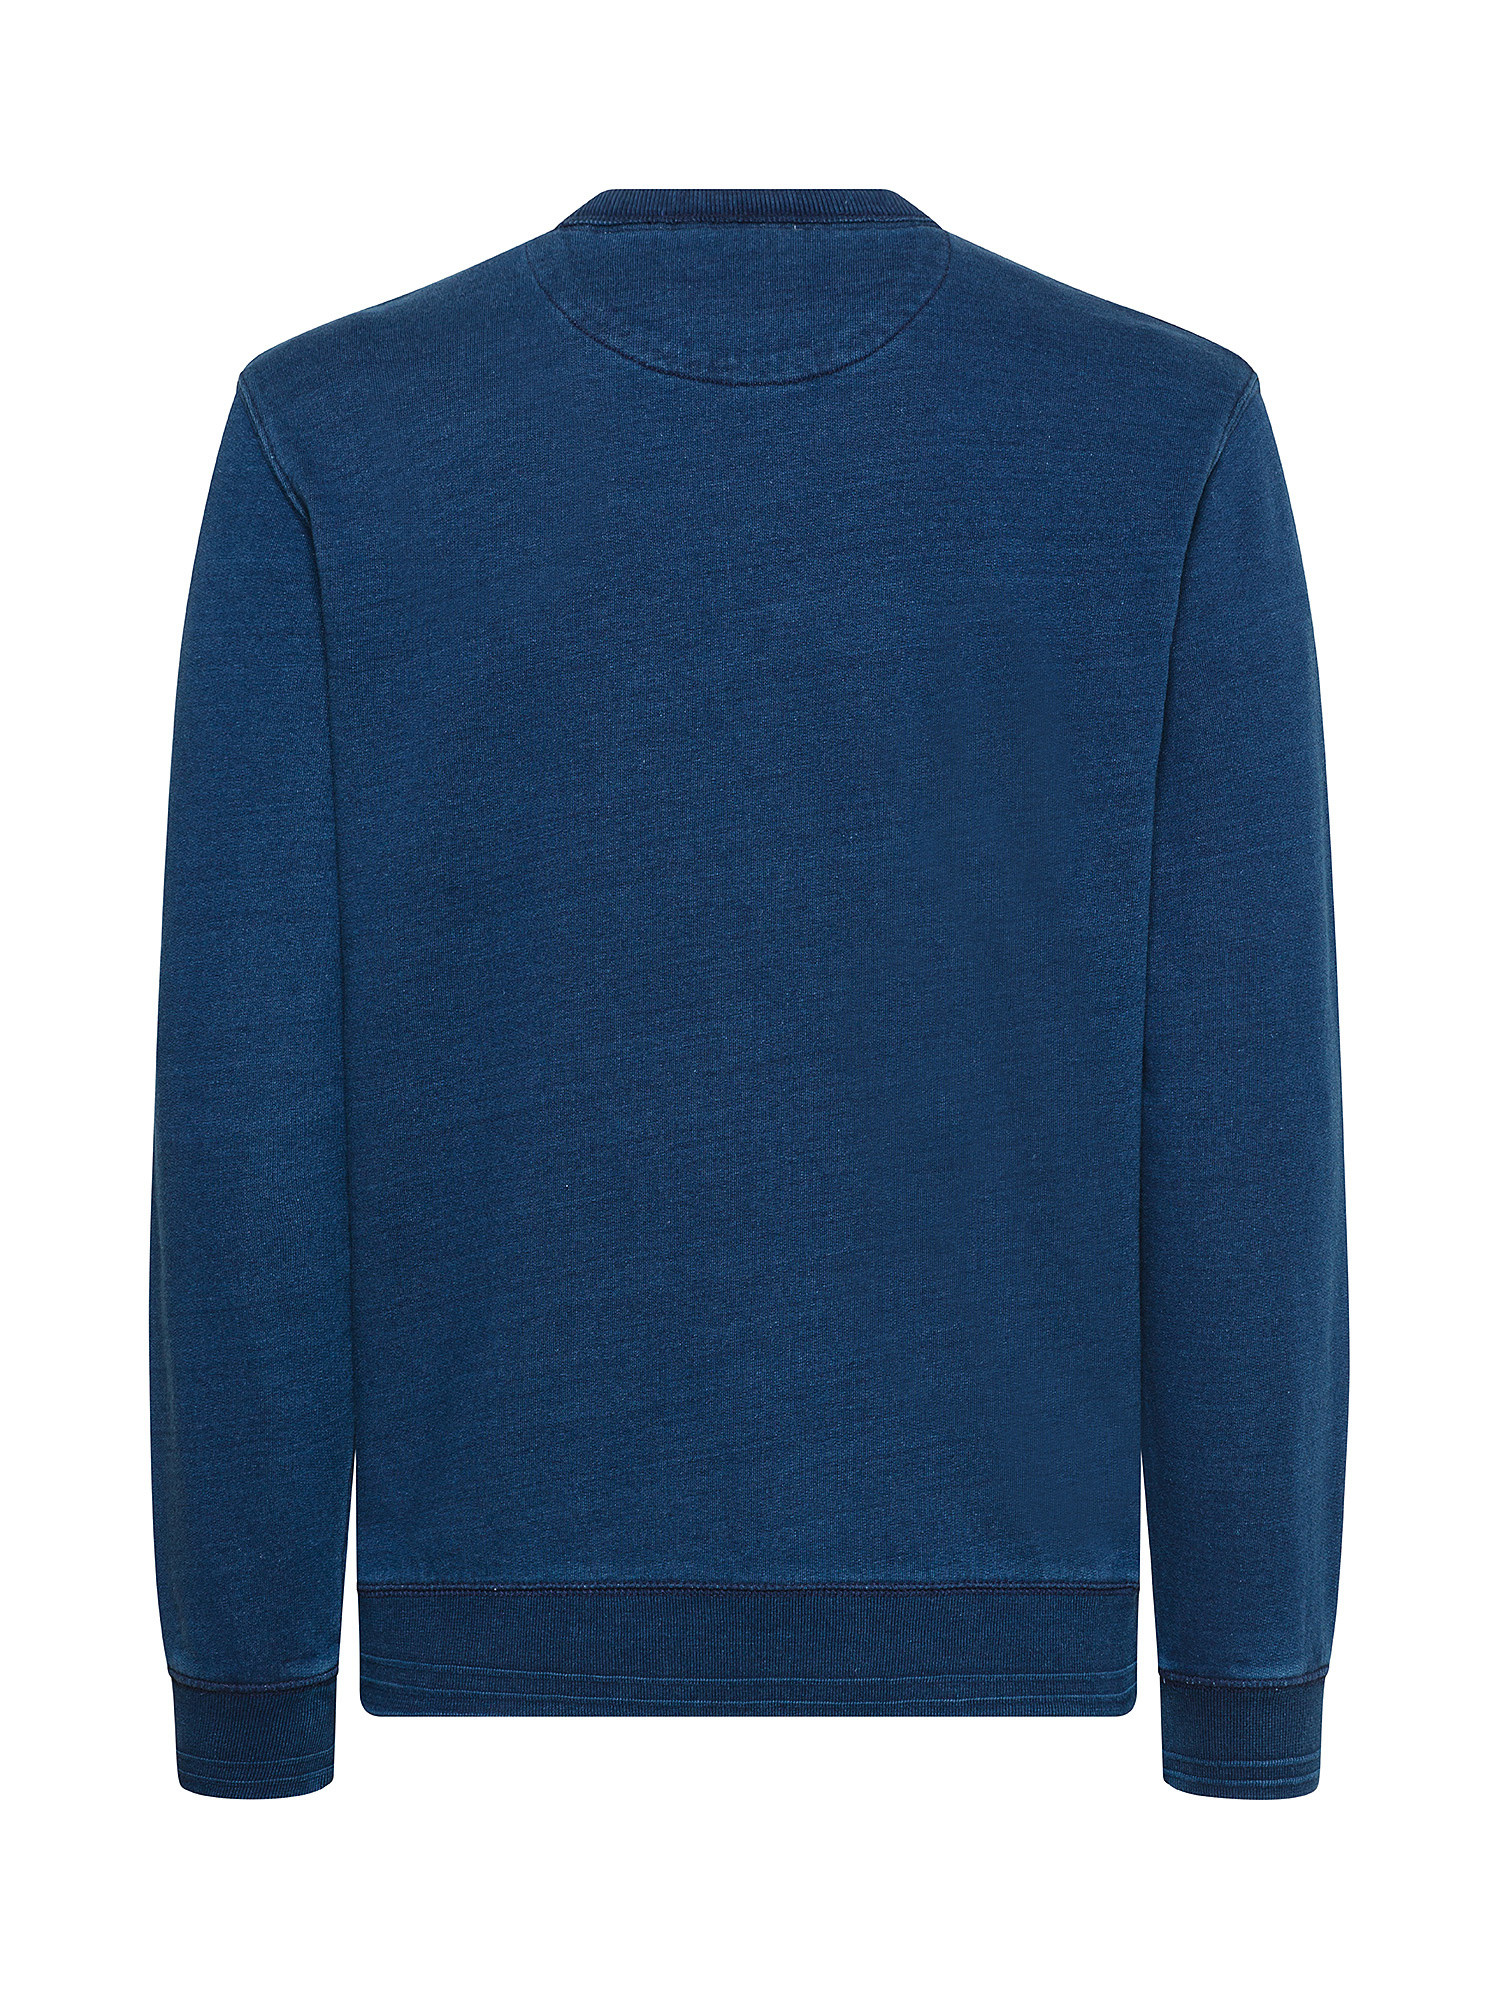 Pepe Jeans - Sweatshirt with logo in cotton, Royal Blue, large image number 1